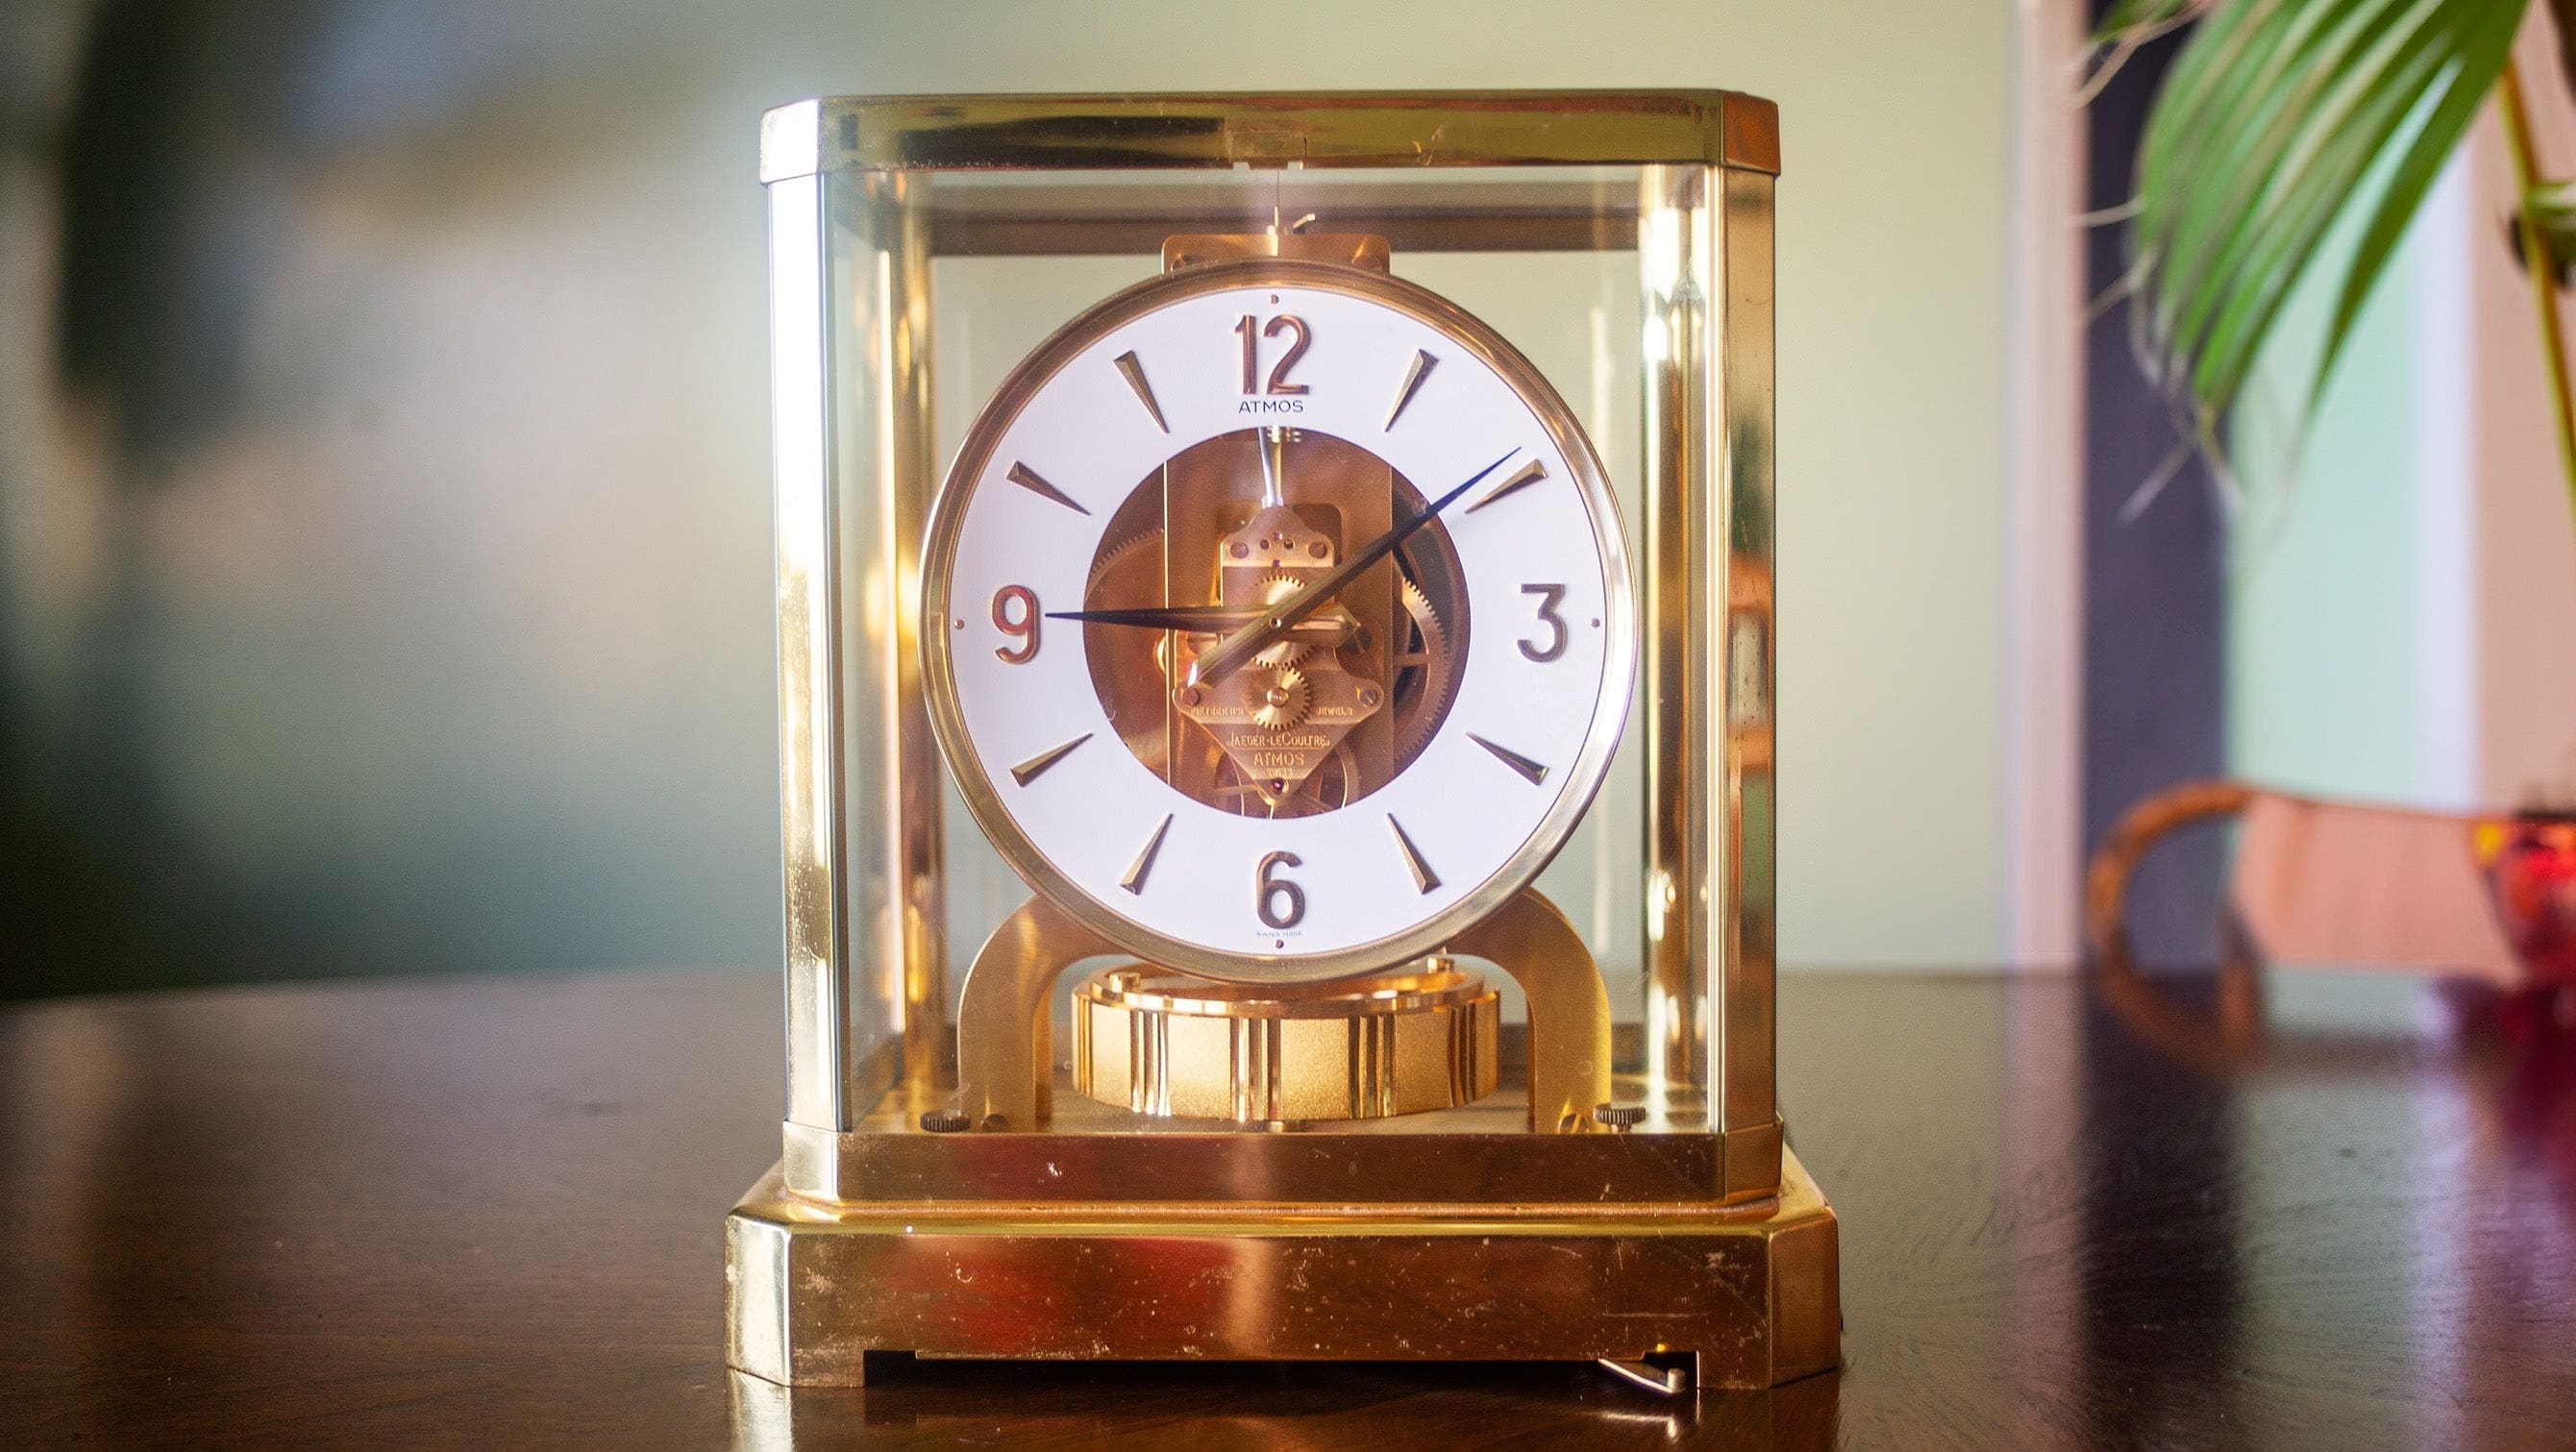 Jaeger LeCoultre Gold-Plated Atmos Clock For Sale at 1stDibs | atmos clock  value, lecoultre clock, atmos clock for sale